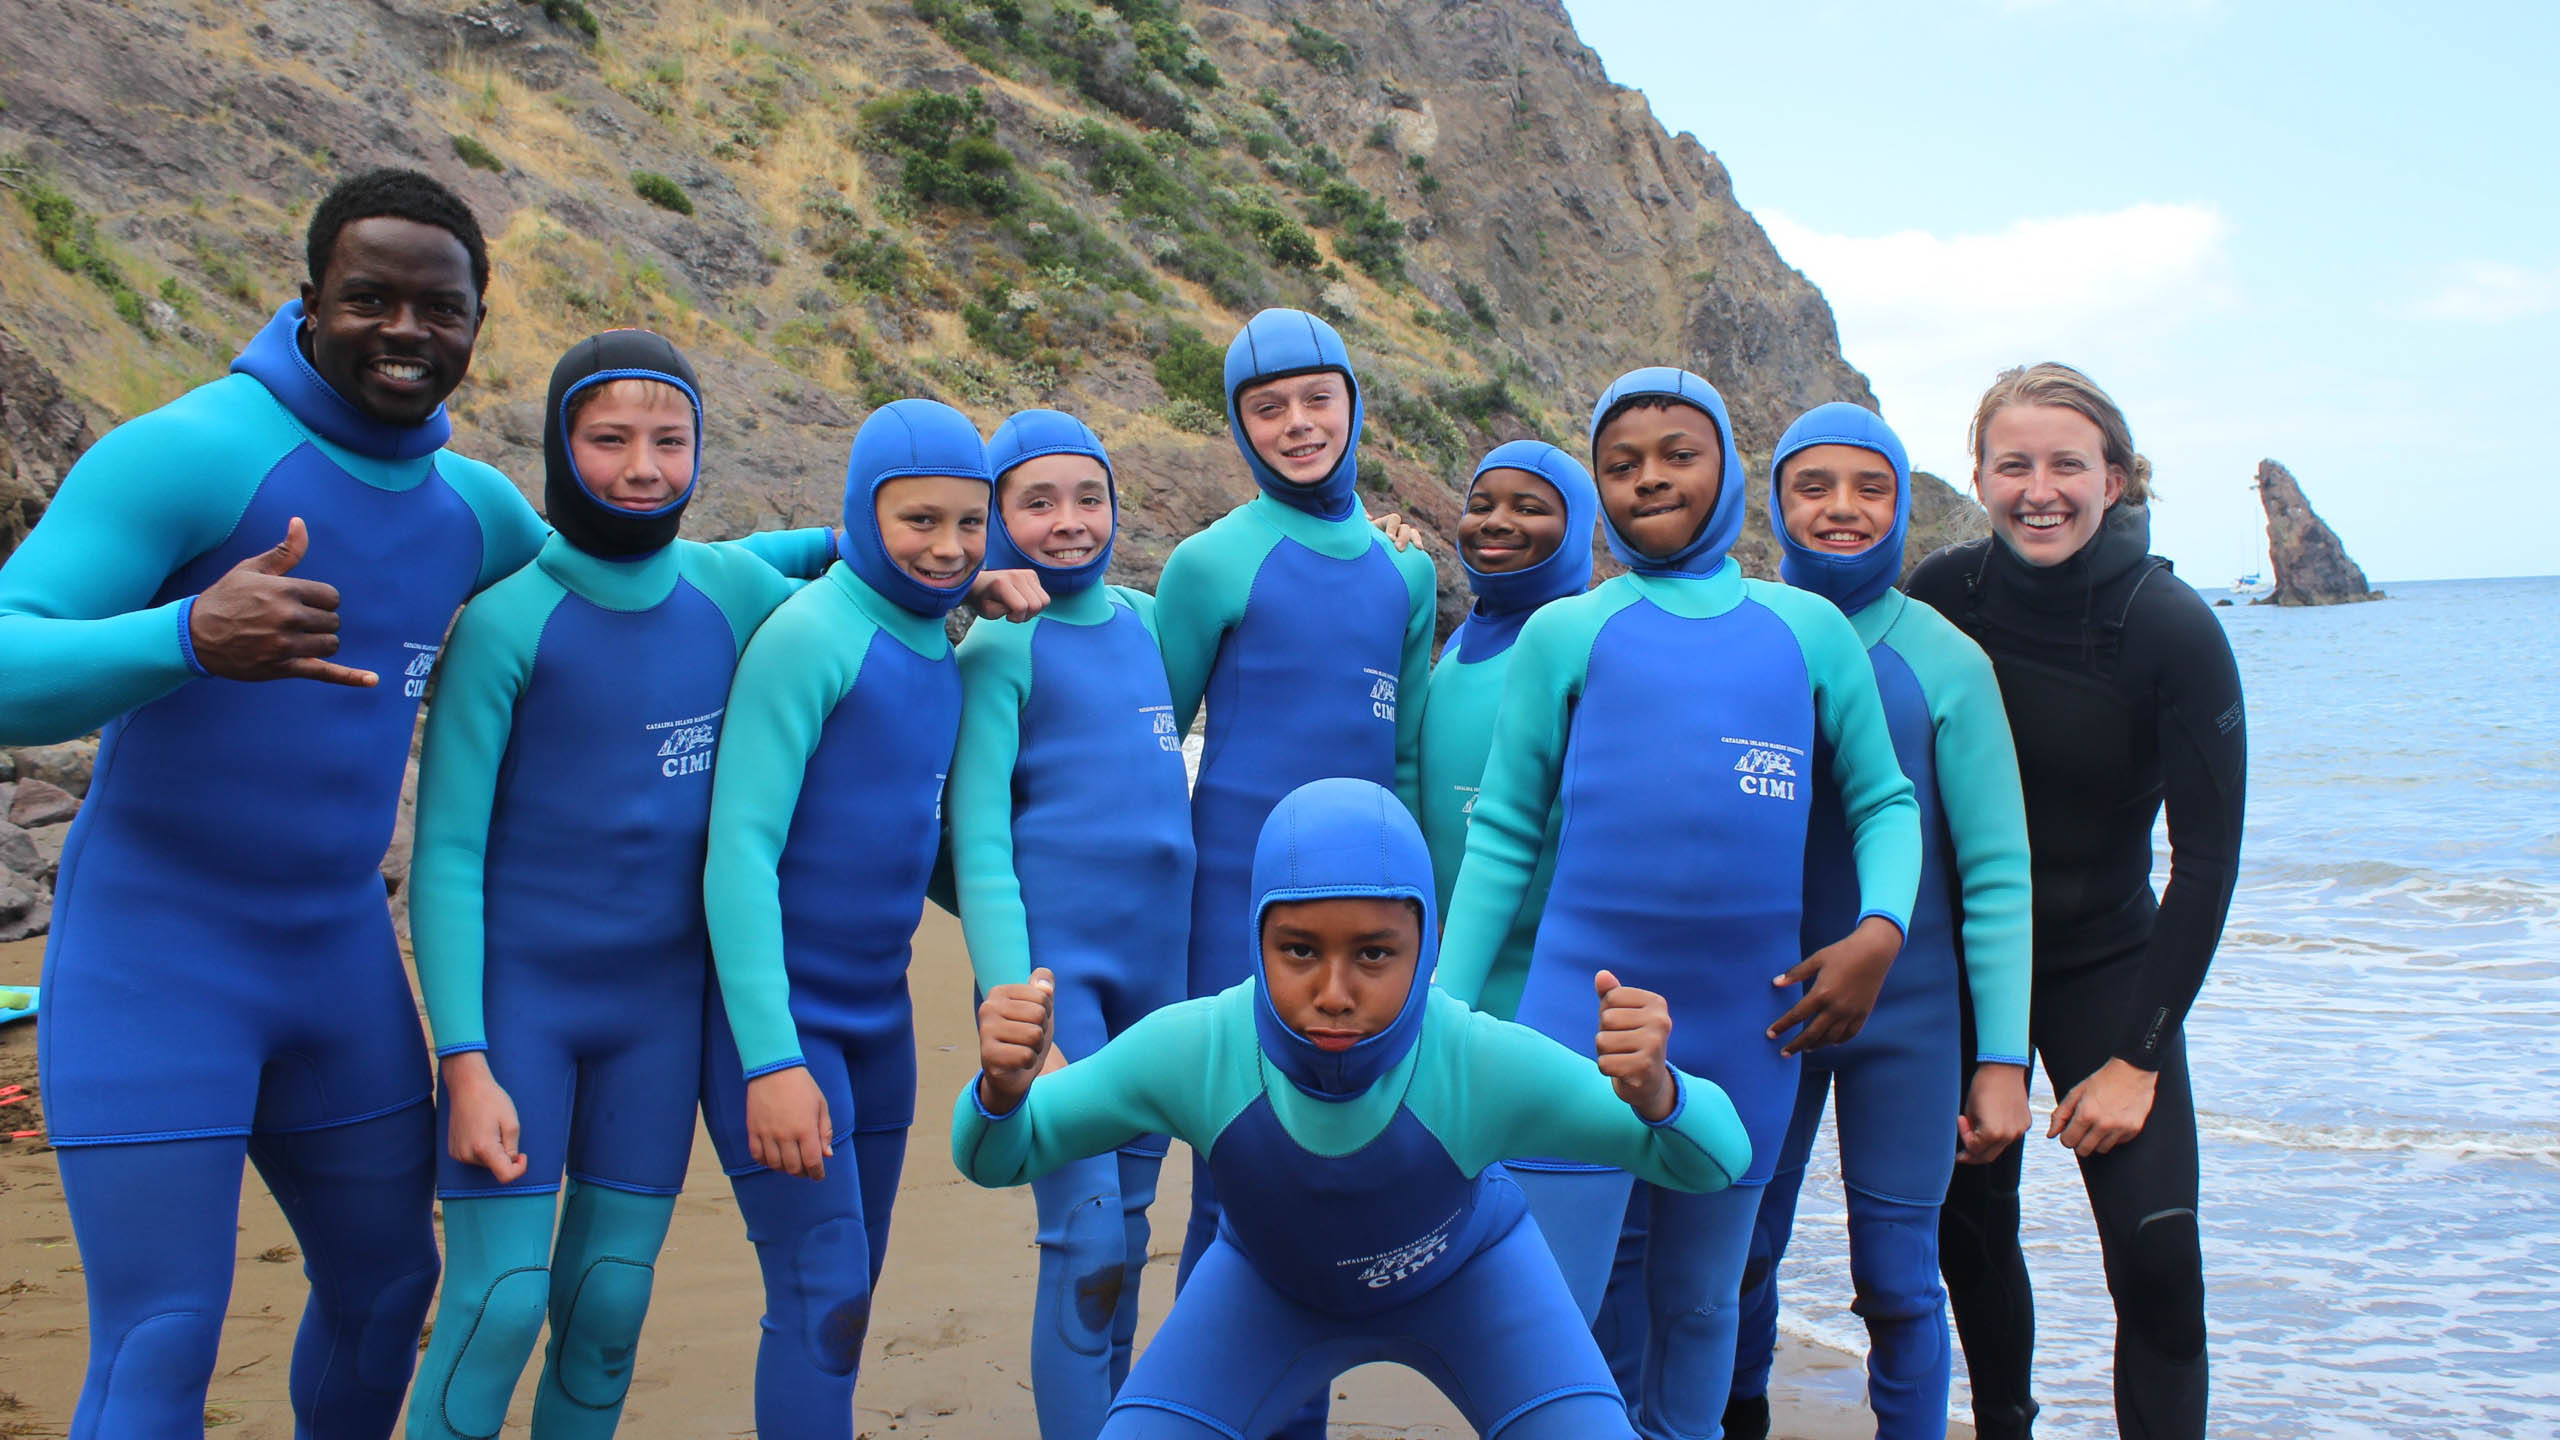 Group posing in wetsuits.